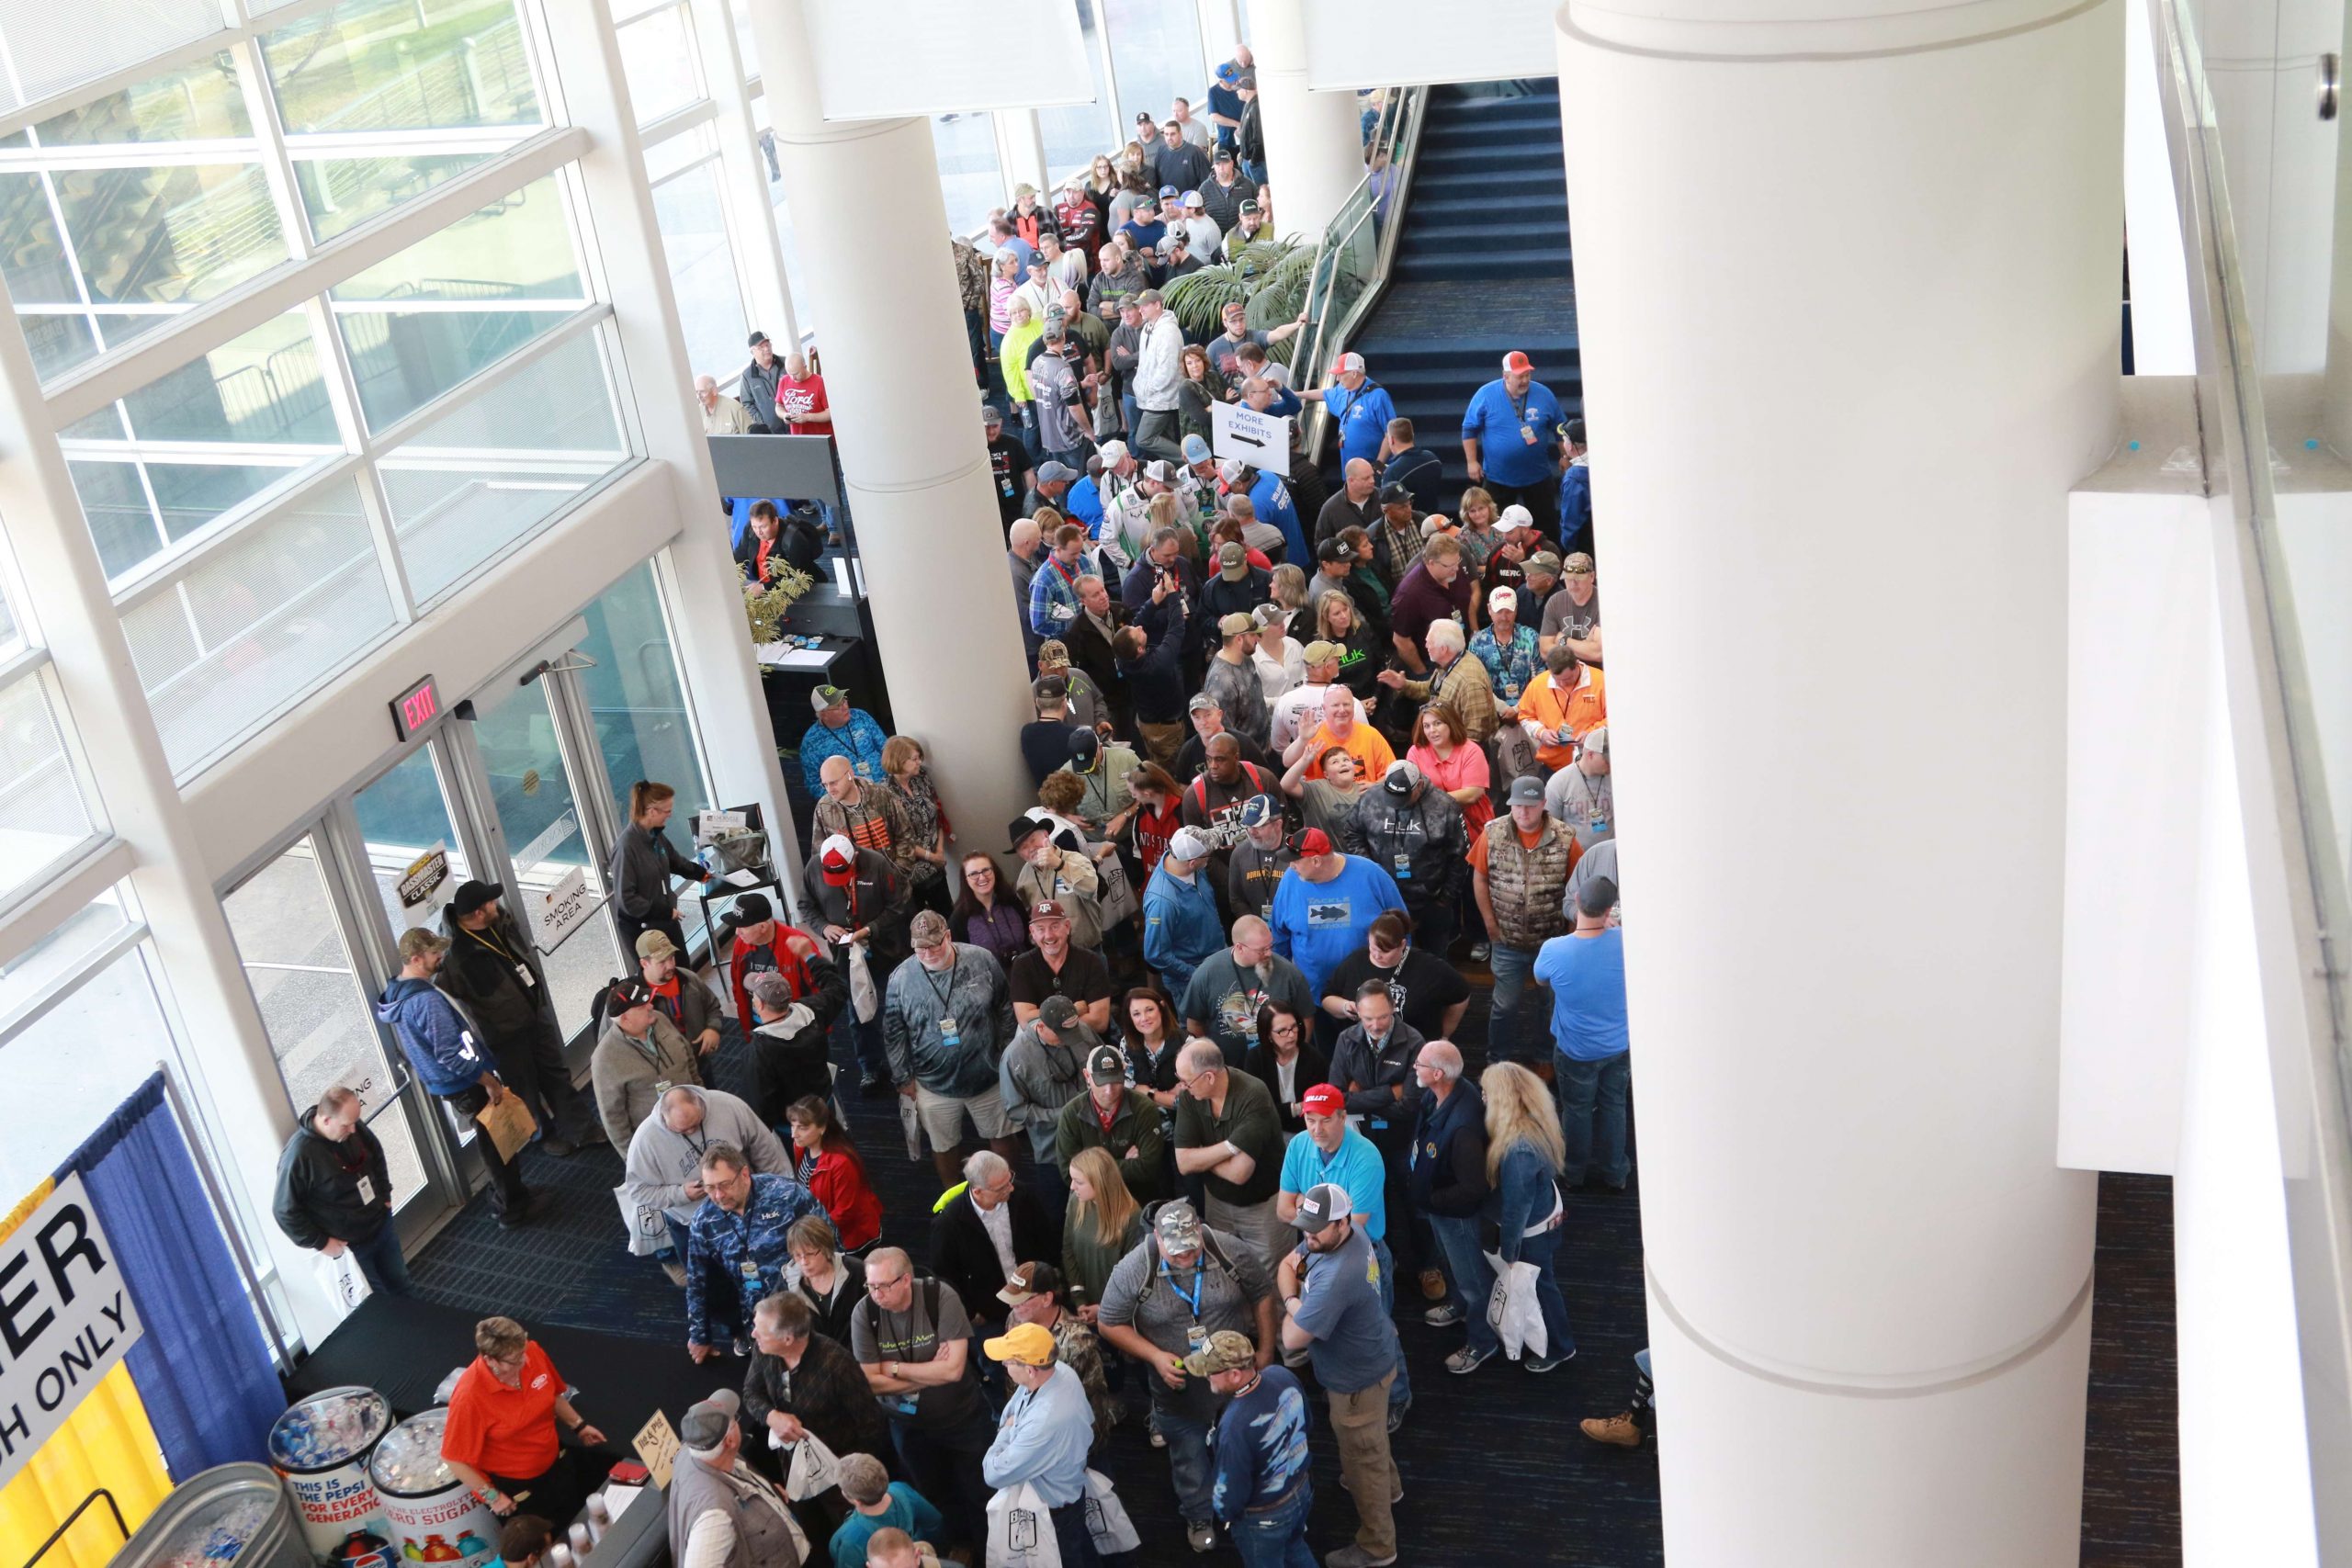 Expo visitors literally packed the Knoxville Convention Center hallways before the event officially opened.